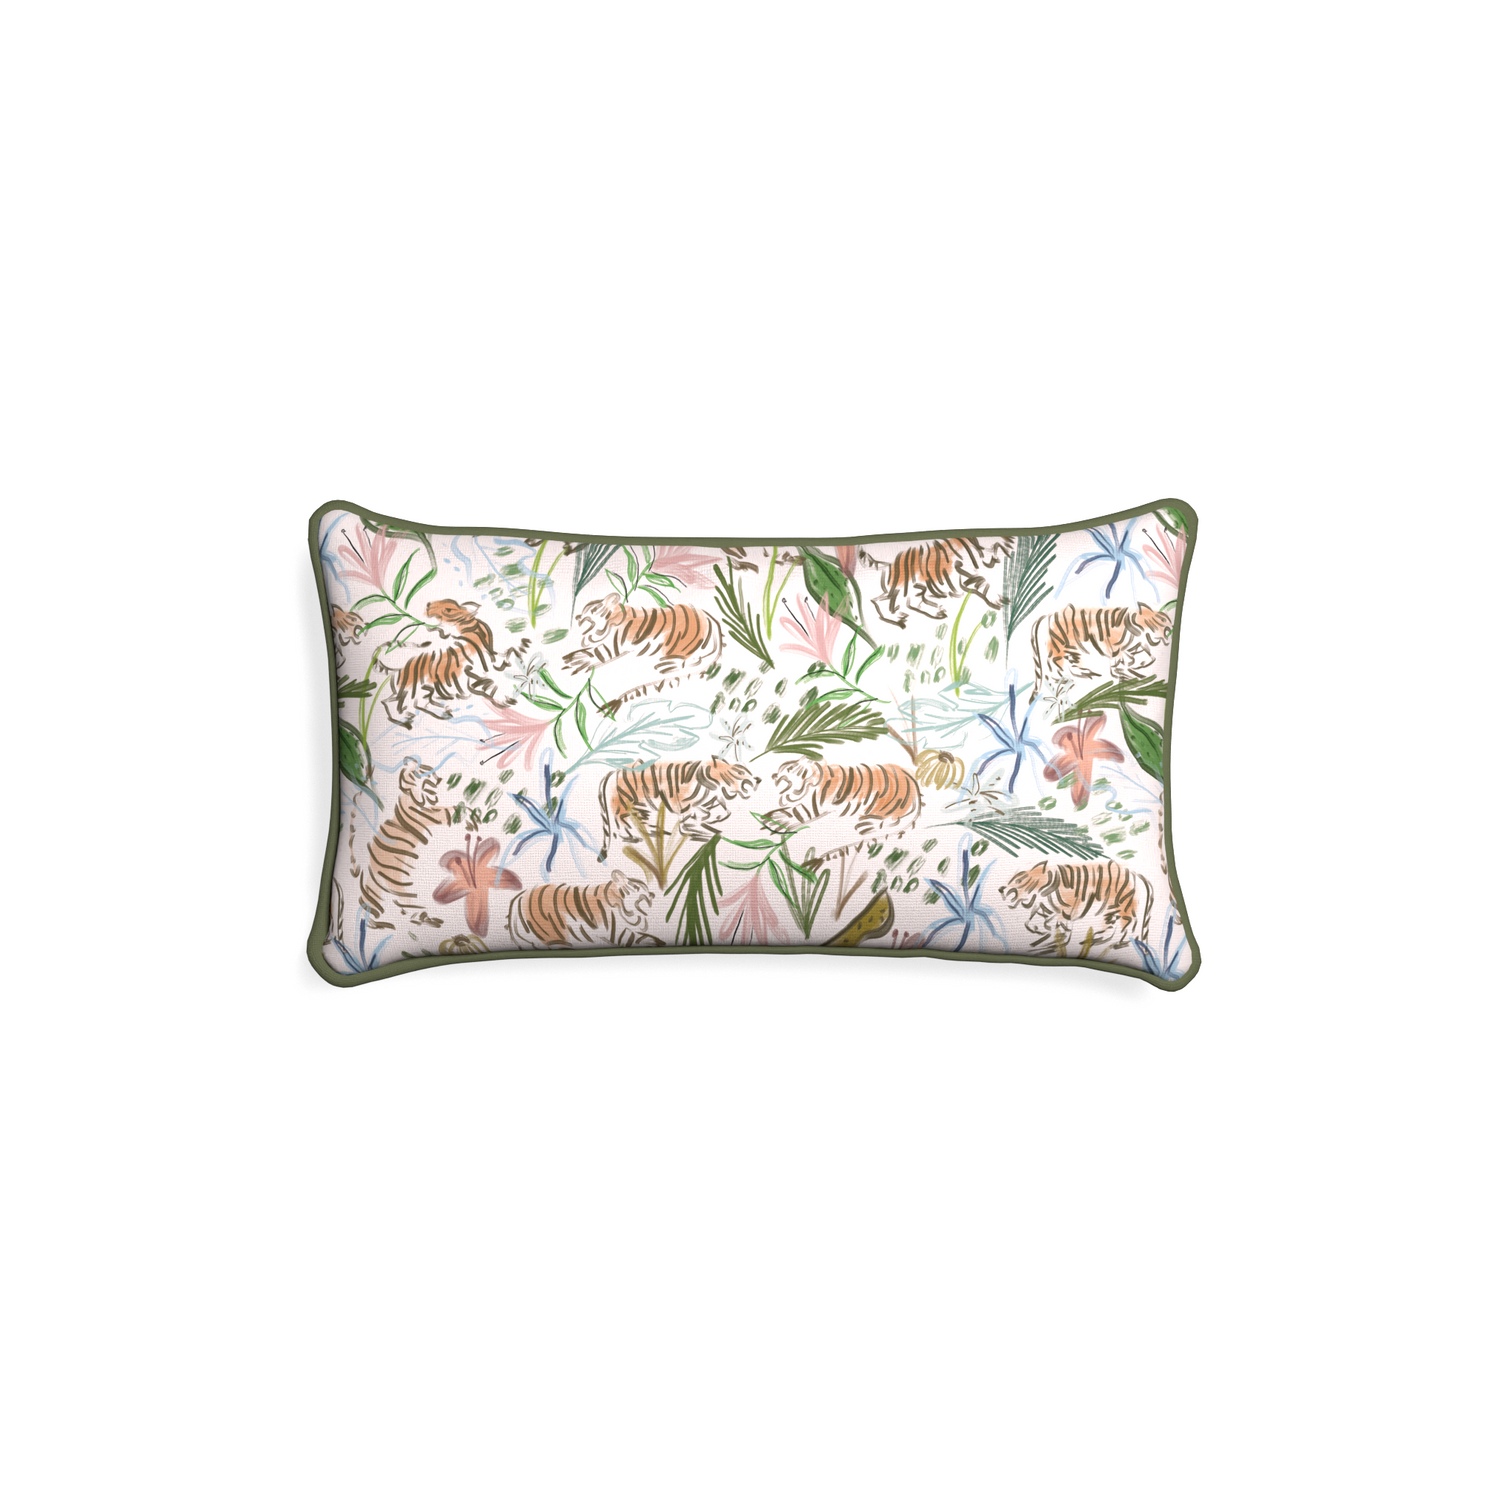 Petite-lumbar frida pink custom pink chinoiserie tigerpillow with f piping on white background